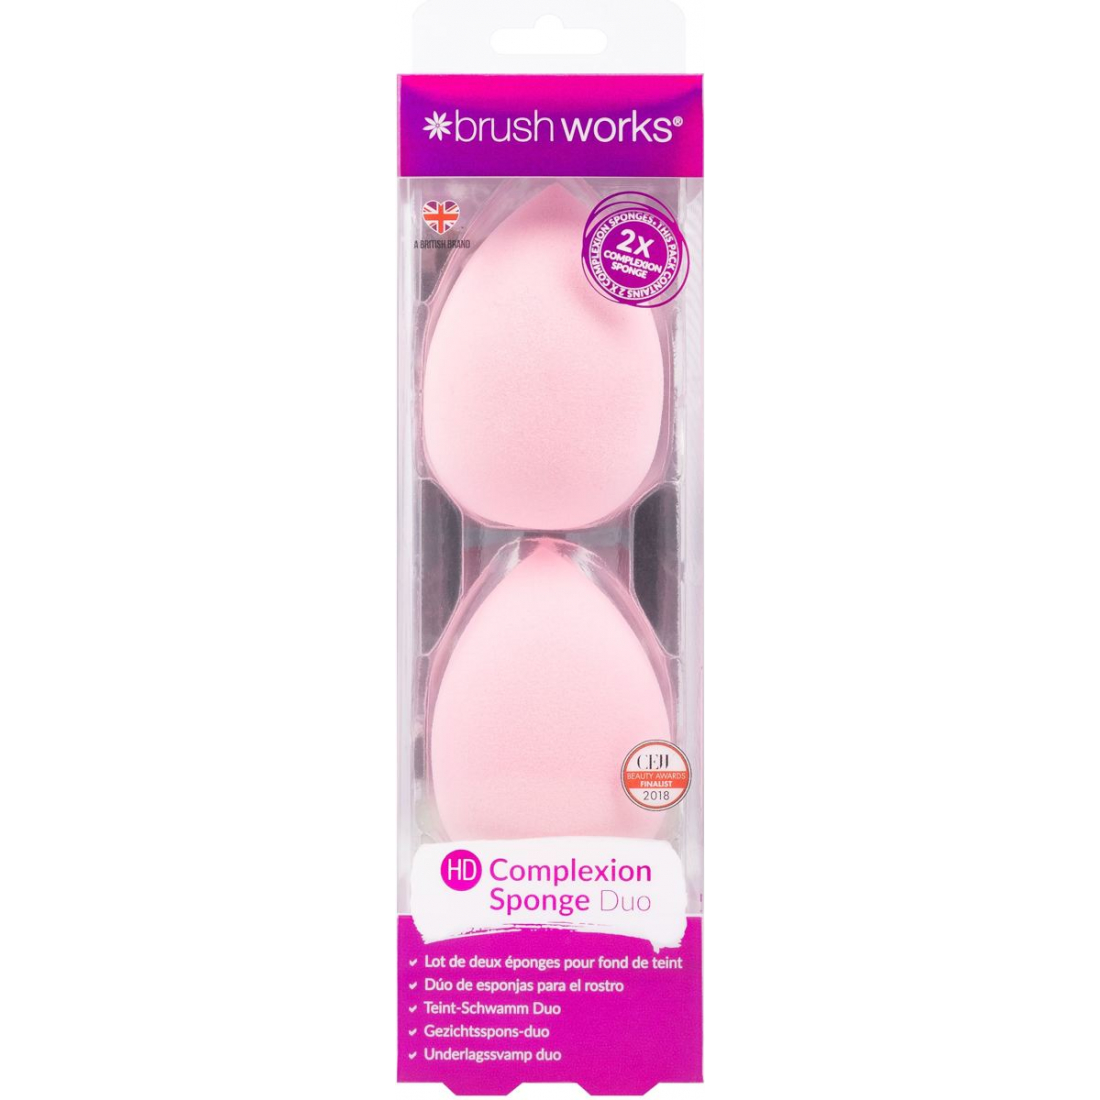 'HD Complexion Duo' Make-up Sponge